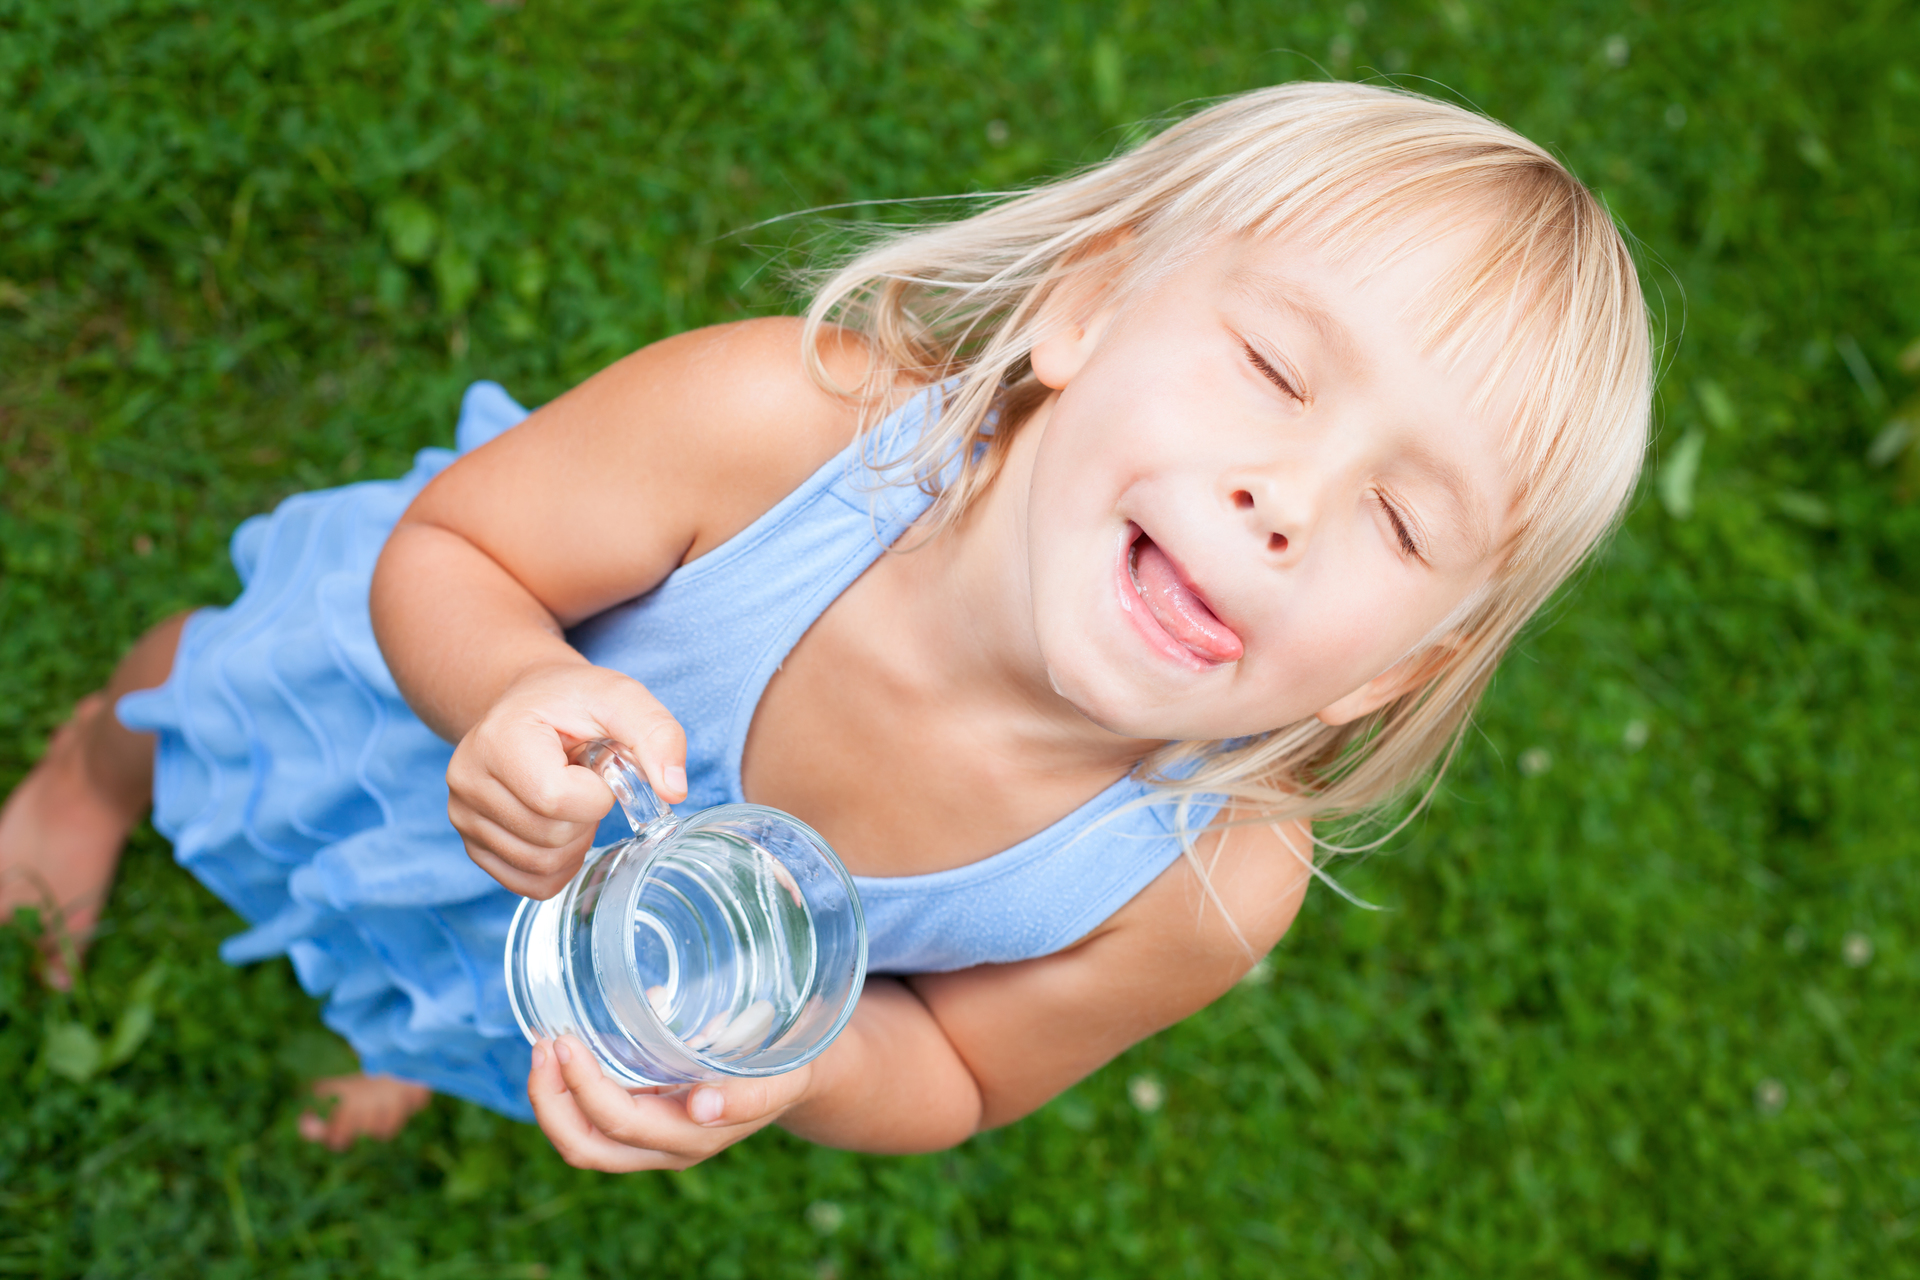 Keep Your Toddler's Teeth Healthy: The Benefits and Hazards of Sippy Cups